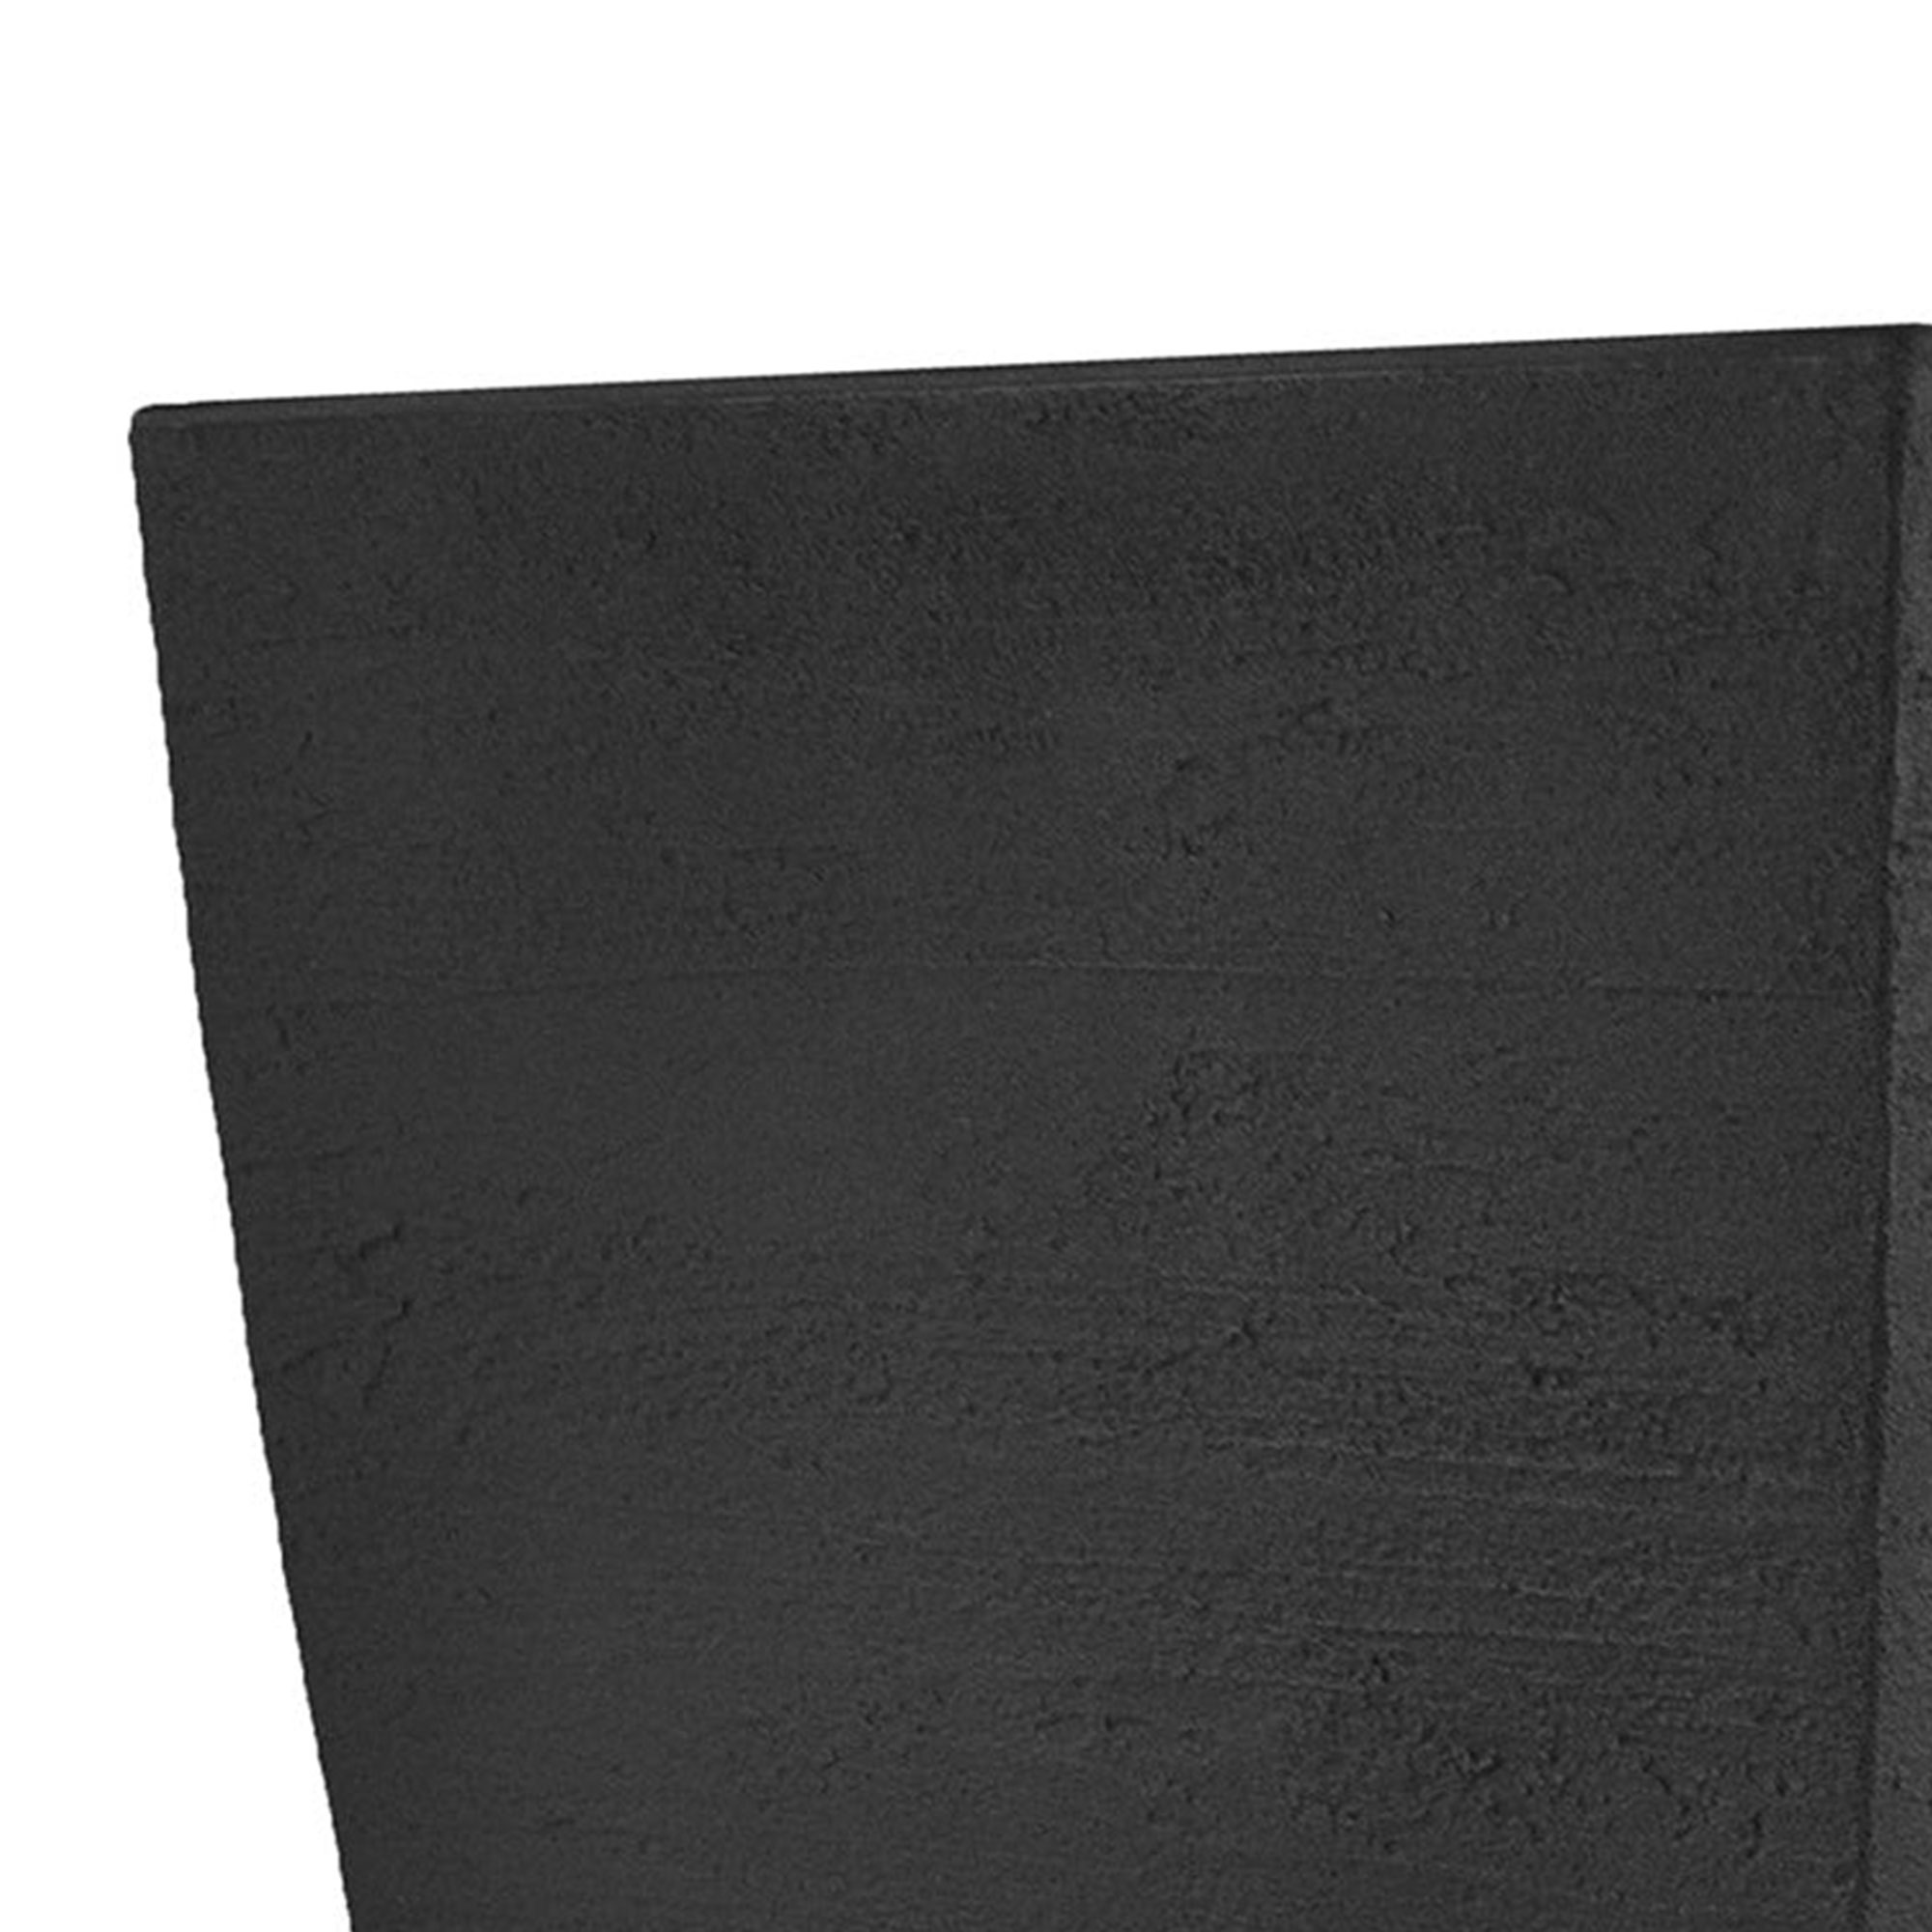 Tusco Products Modern 19 Inch Molded Plastic Square Planter, Black - image 2 of 5